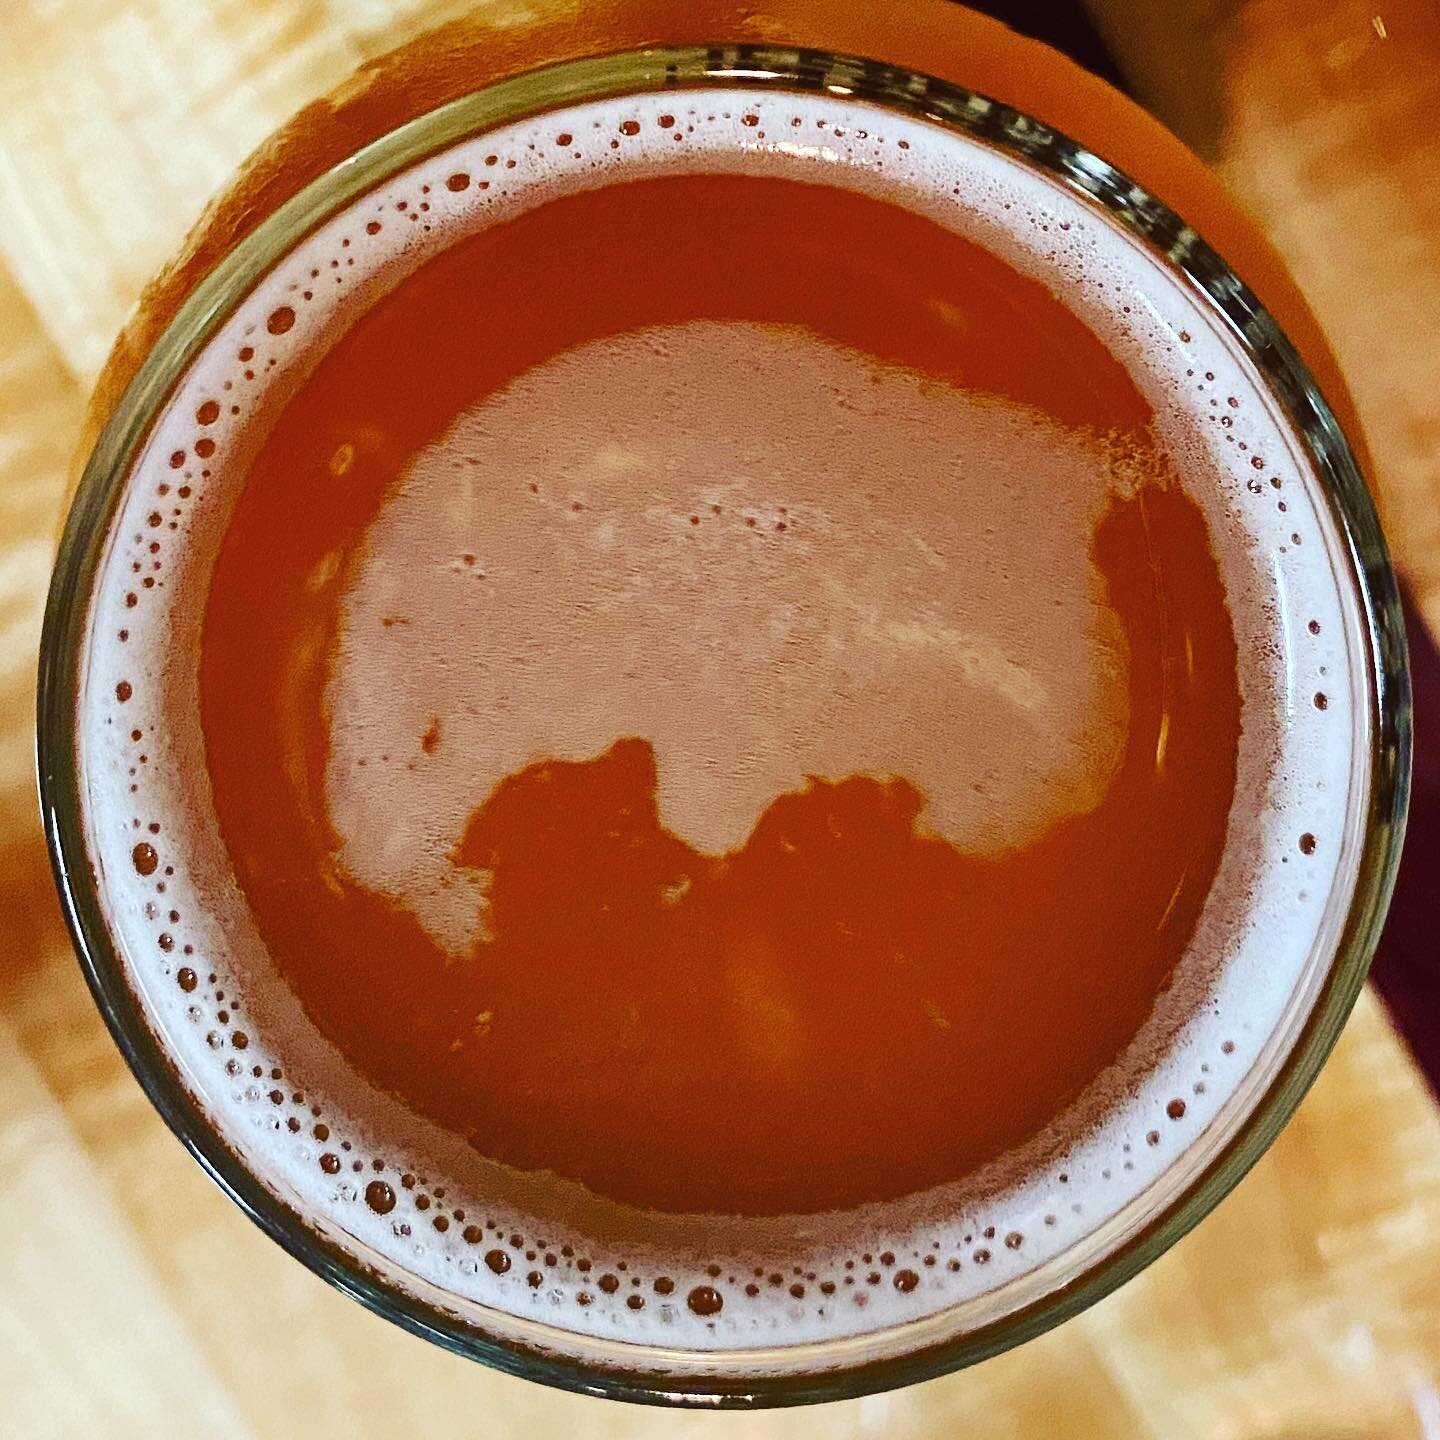 We saw many things in this Always Sunny Orange Milkshake IPA @manhattanbrewing - a brain, a tardigrade (aka little water bear), and other things I can&rsquo;t remember now. What do you see?? #beerrorschach
.
.
Parksnpints.com
.
.
#KSbeer #drinklocal 